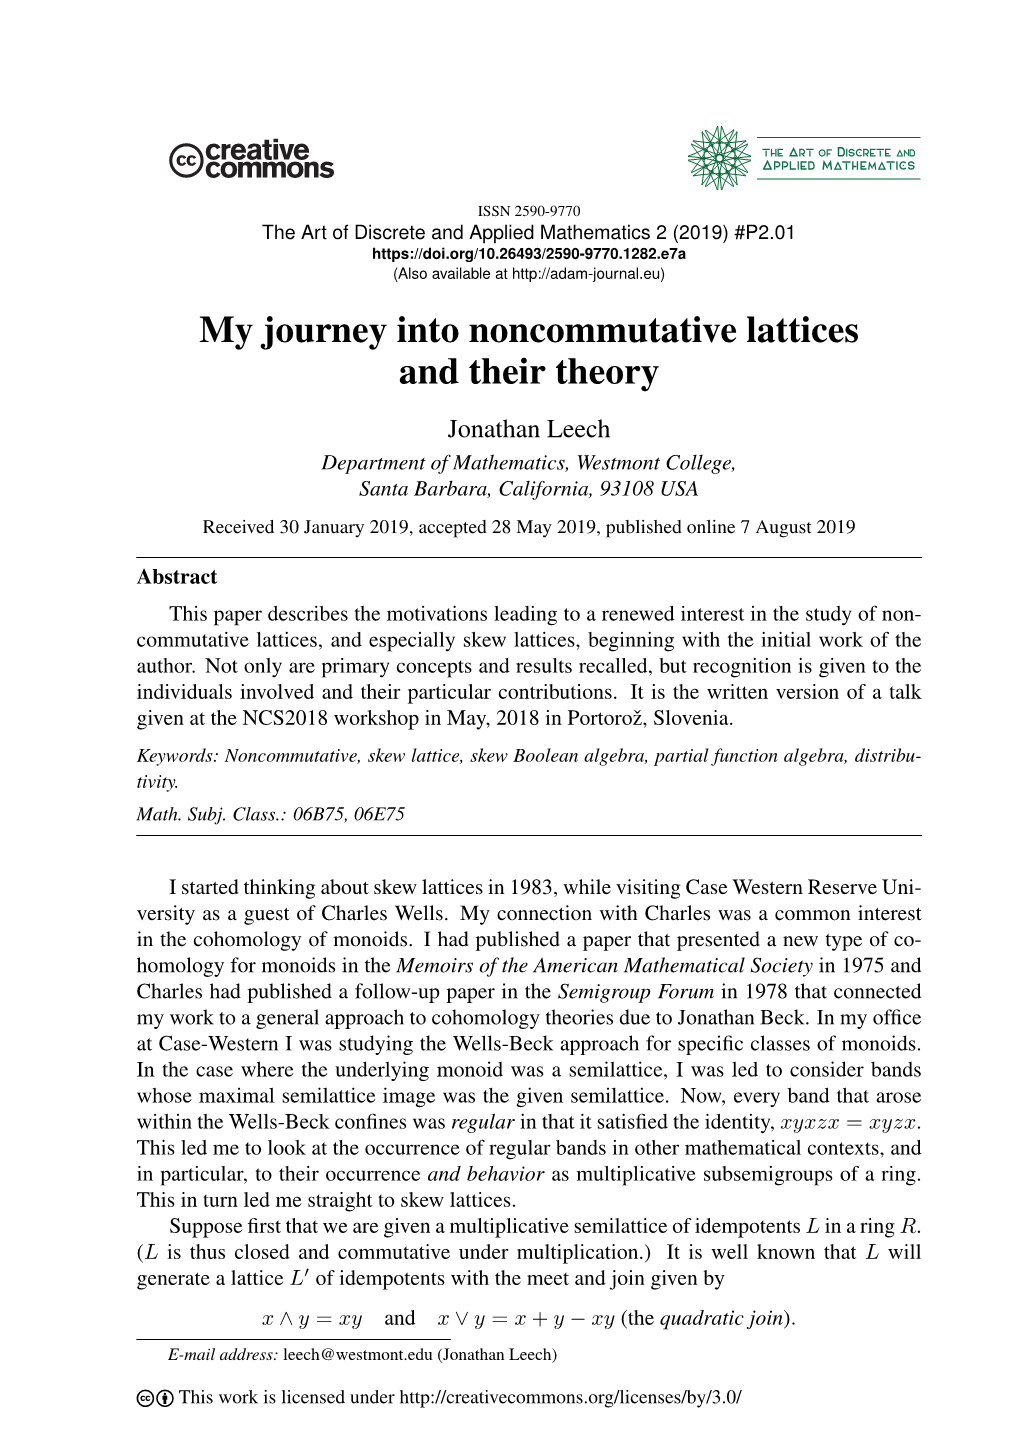 My Journey Into Noncommutative Lattices and Their Theory